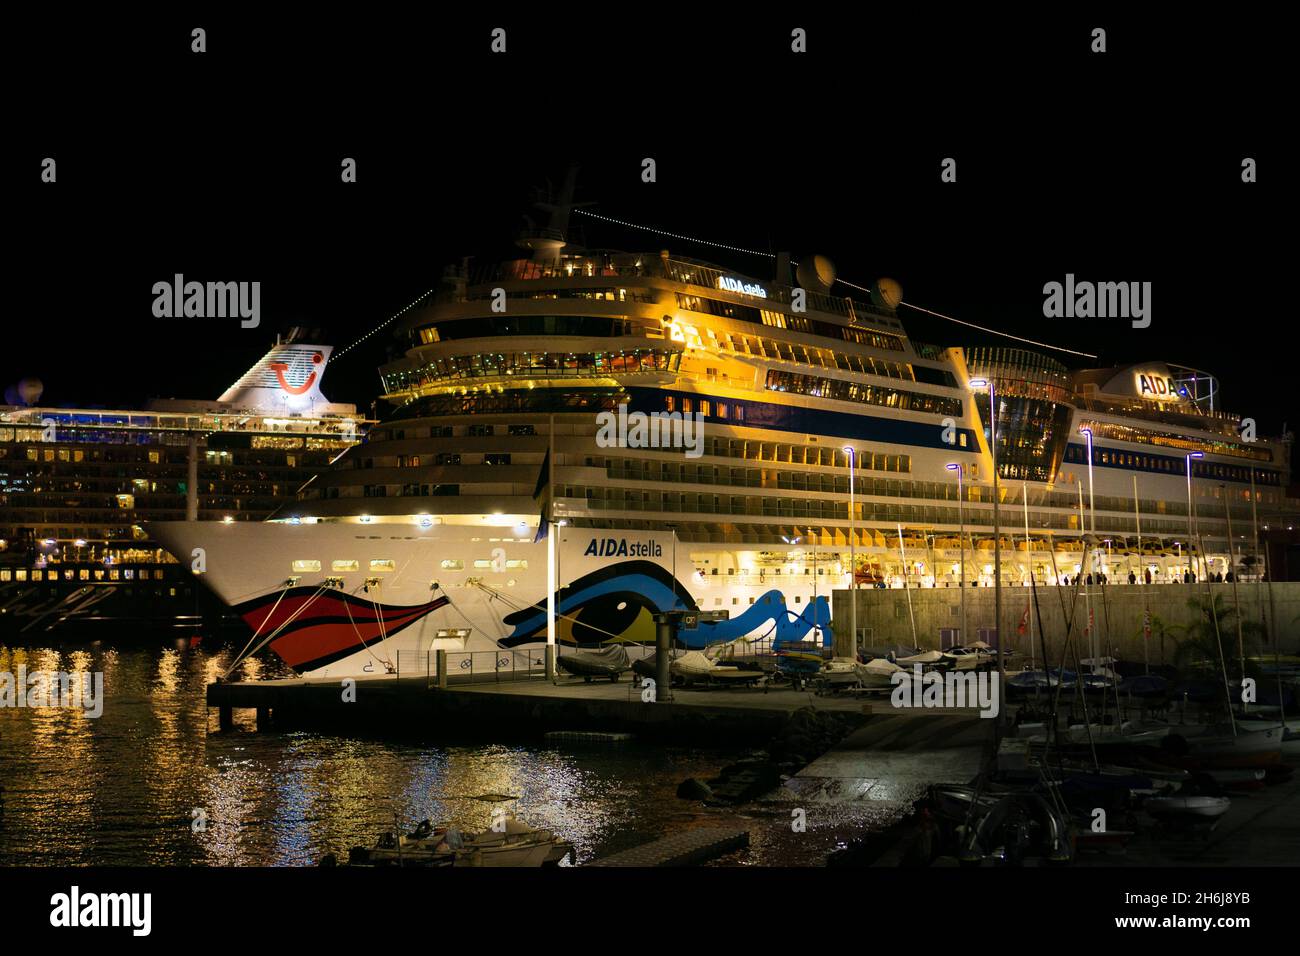 FUNCHAL, PORTUGAL - Dec 17, 2019: A night view of the cruise ship AIDA Stella in the port. Funchal, Madeira, Portugal Stock Photo